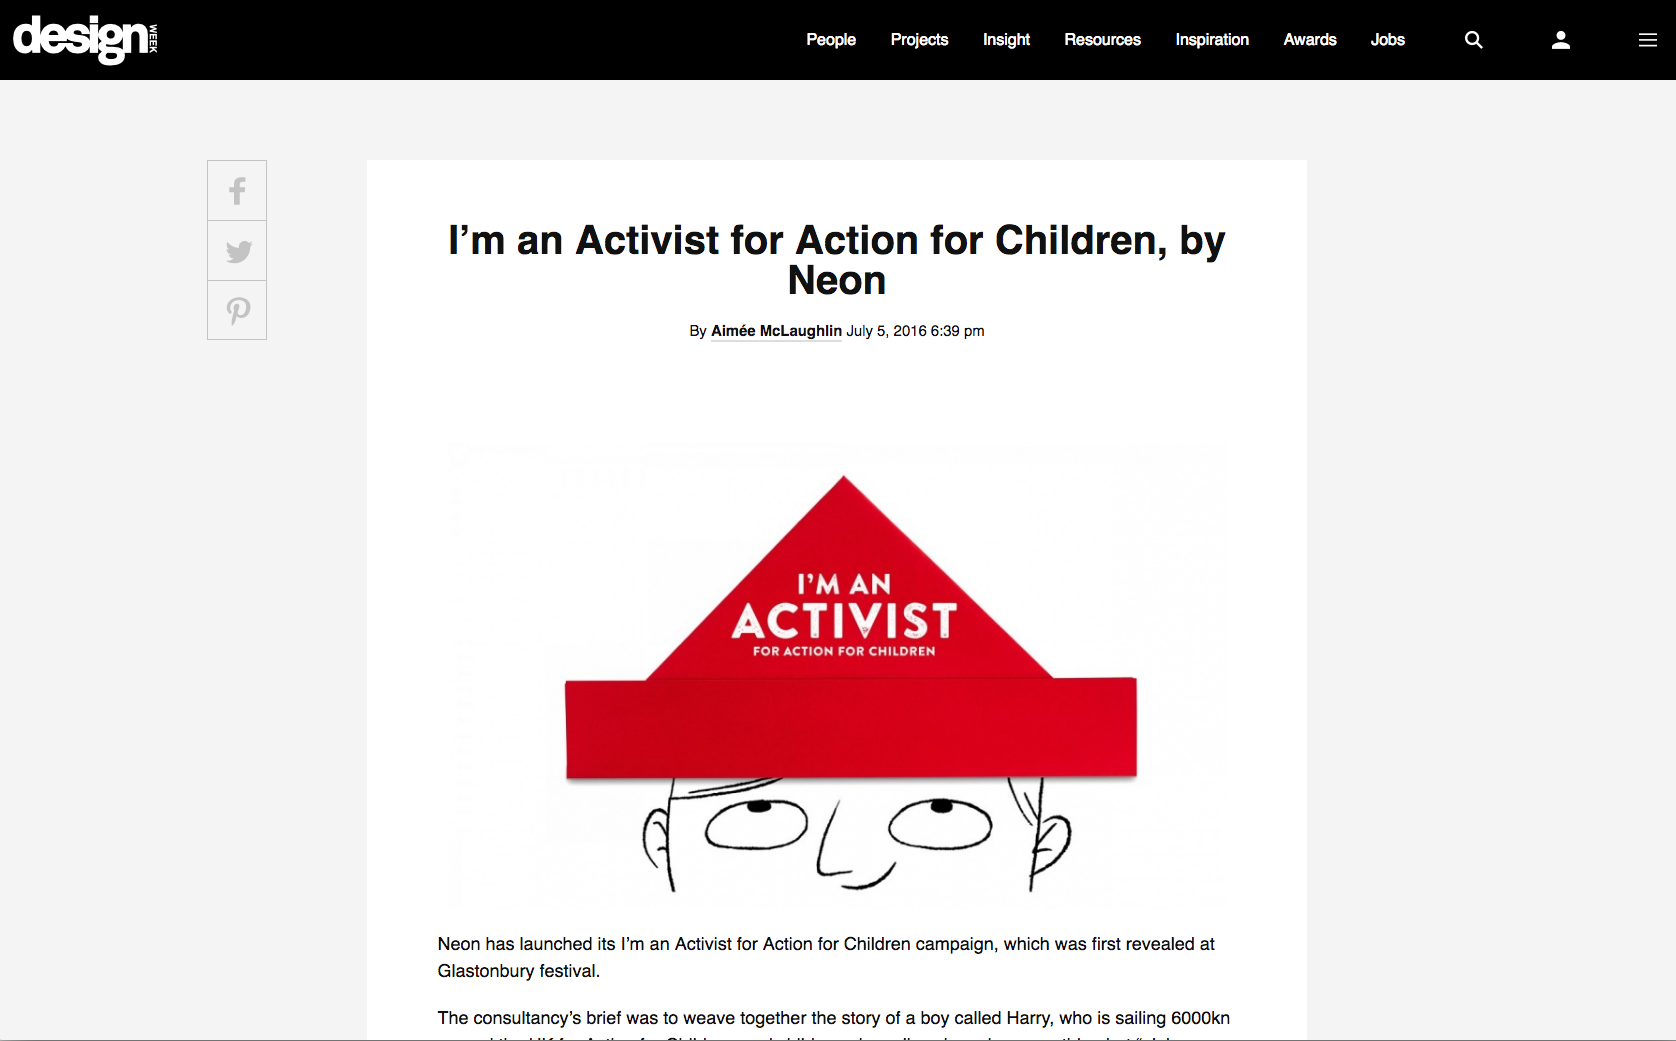 Neon's work for Action for Children is featured on Design Weeks website in the Inspiration section